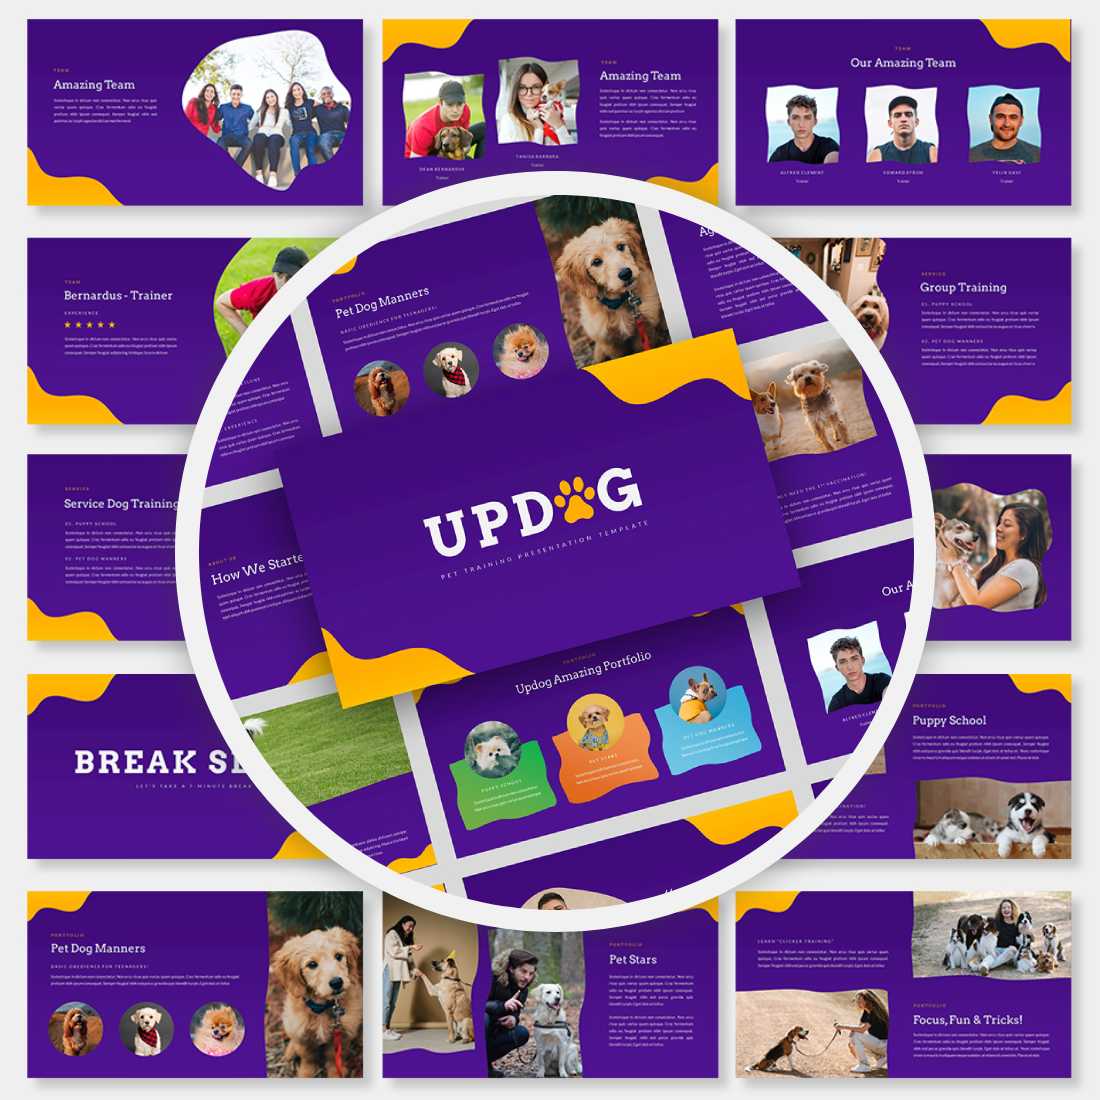 Updog - Pet Training PowerPoint Presentation Template cover image.